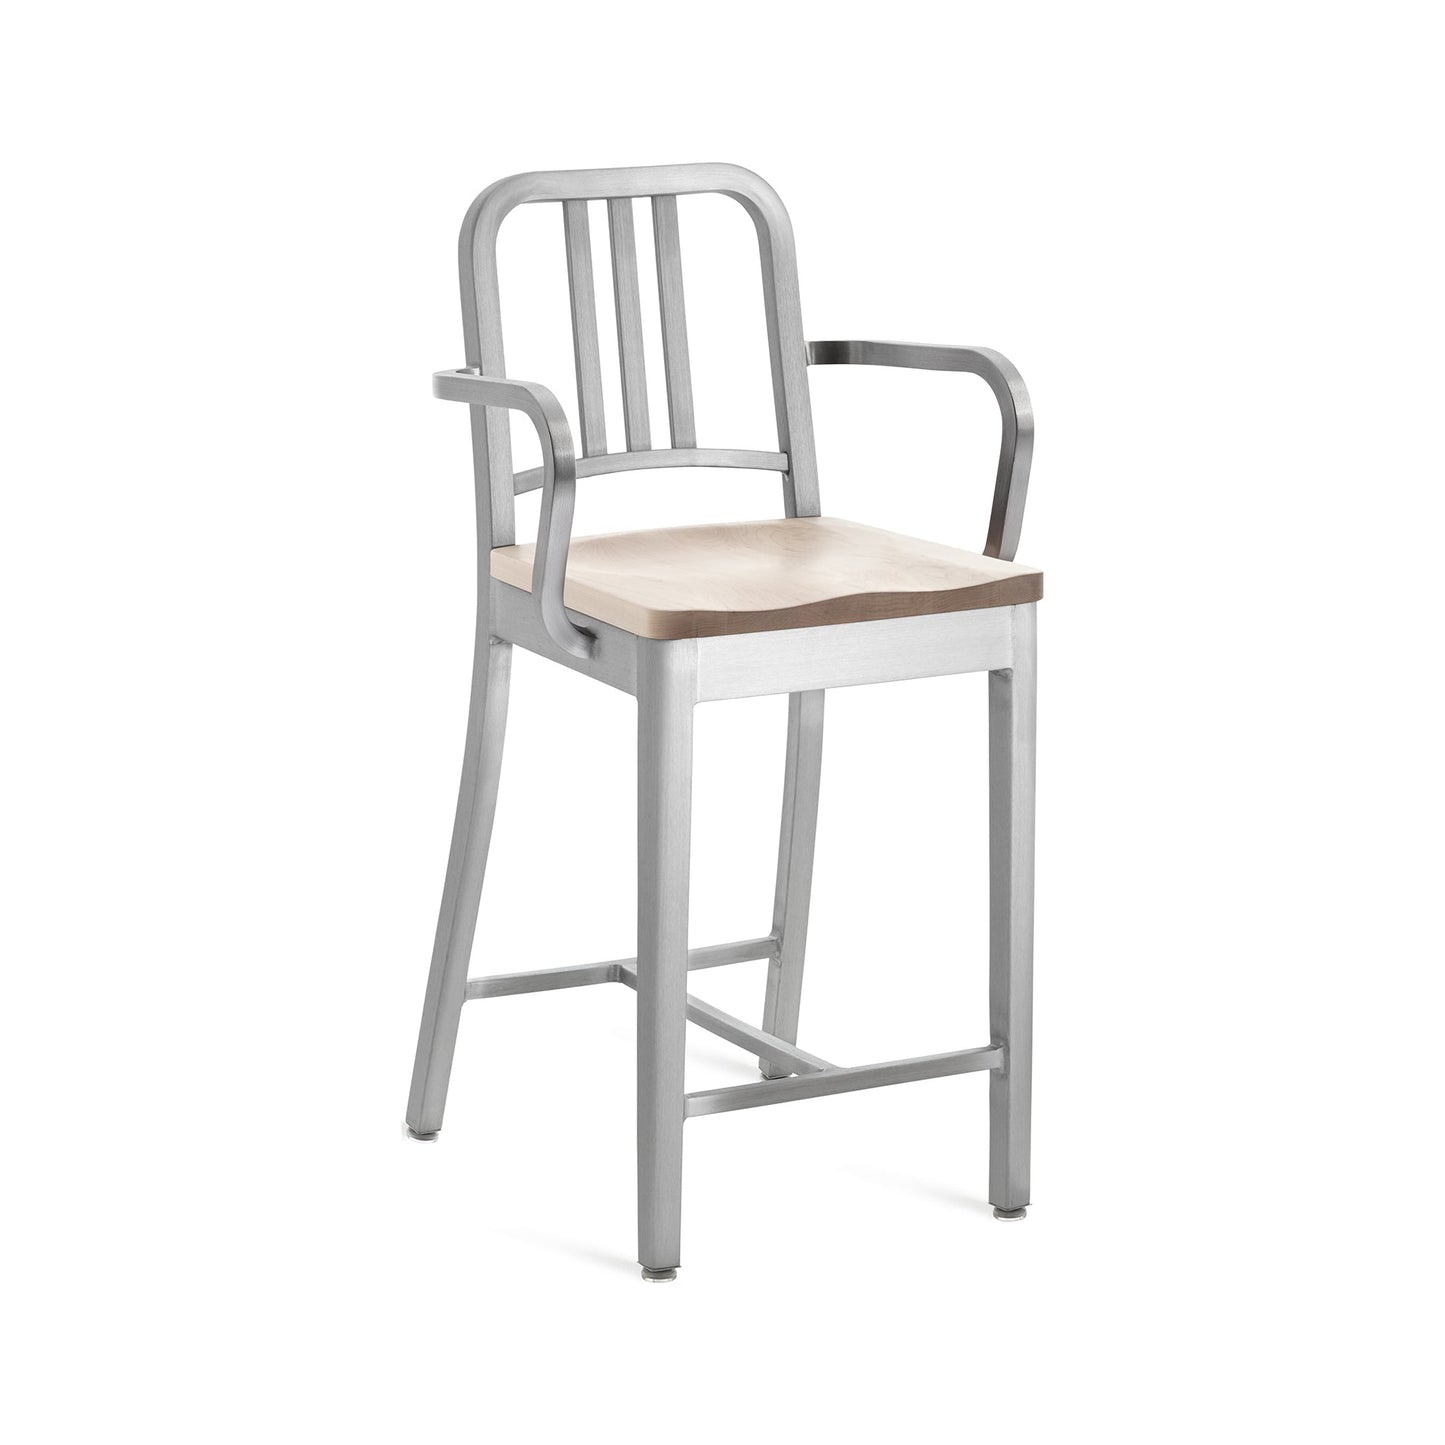 Navy Stool with Arms & Wood Seat